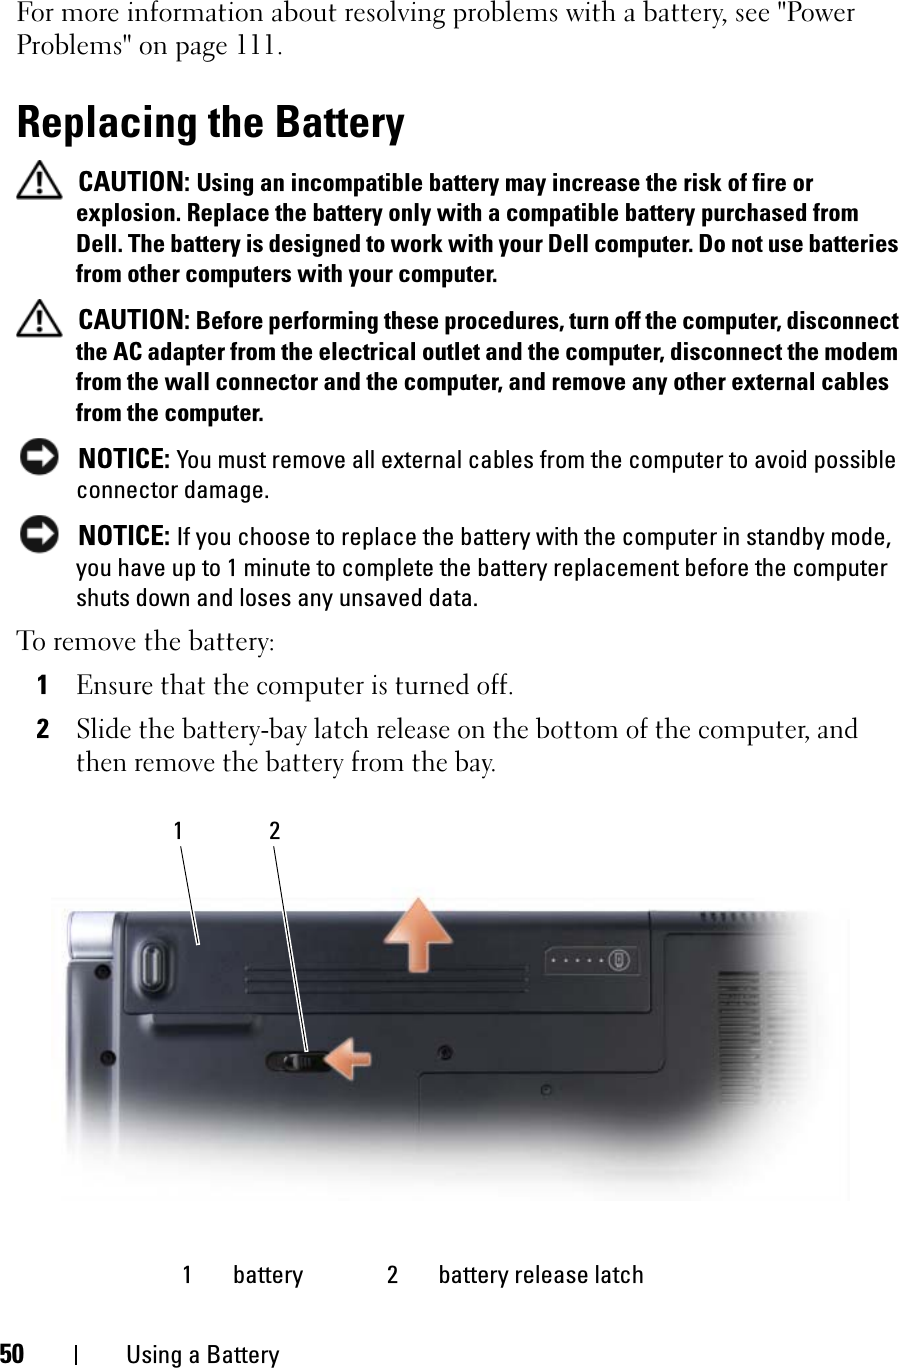 50 Using a BatteryFor more information about resolving problems with a battery, see &quot;Power Problems&quot; on page 111.Replacing the BatteryCAUTION: Using an incompatible battery may increase the risk of fire or explosion. Replace the battery only with a compatible battery purchased from Dell. The battery is designed to work with your Dell computer. Do not use batteries from other computers with your computer. CAUTION: Before performing these procedures, turn off the computer, disconnect the AC adapter from the electrical outlet and the computer, disconnect the modem from the wall connector and the computer, and remove any other external cables from the computer.NOTICE: You must remove all external cables from the computer to avoid possible connector damage.NOTICE: If you choose to replace the battery with the computer in standby mode, you have up to 1 minute to complete the battery replacement before the computer shuts down and loses any unsaved data.To remove the battery:1Ensure that the computer is turned off.2Slide the battery-bay latch release on the bottom of the computer, and then remove the battery from the bay.1 battery 2 battery release latch21